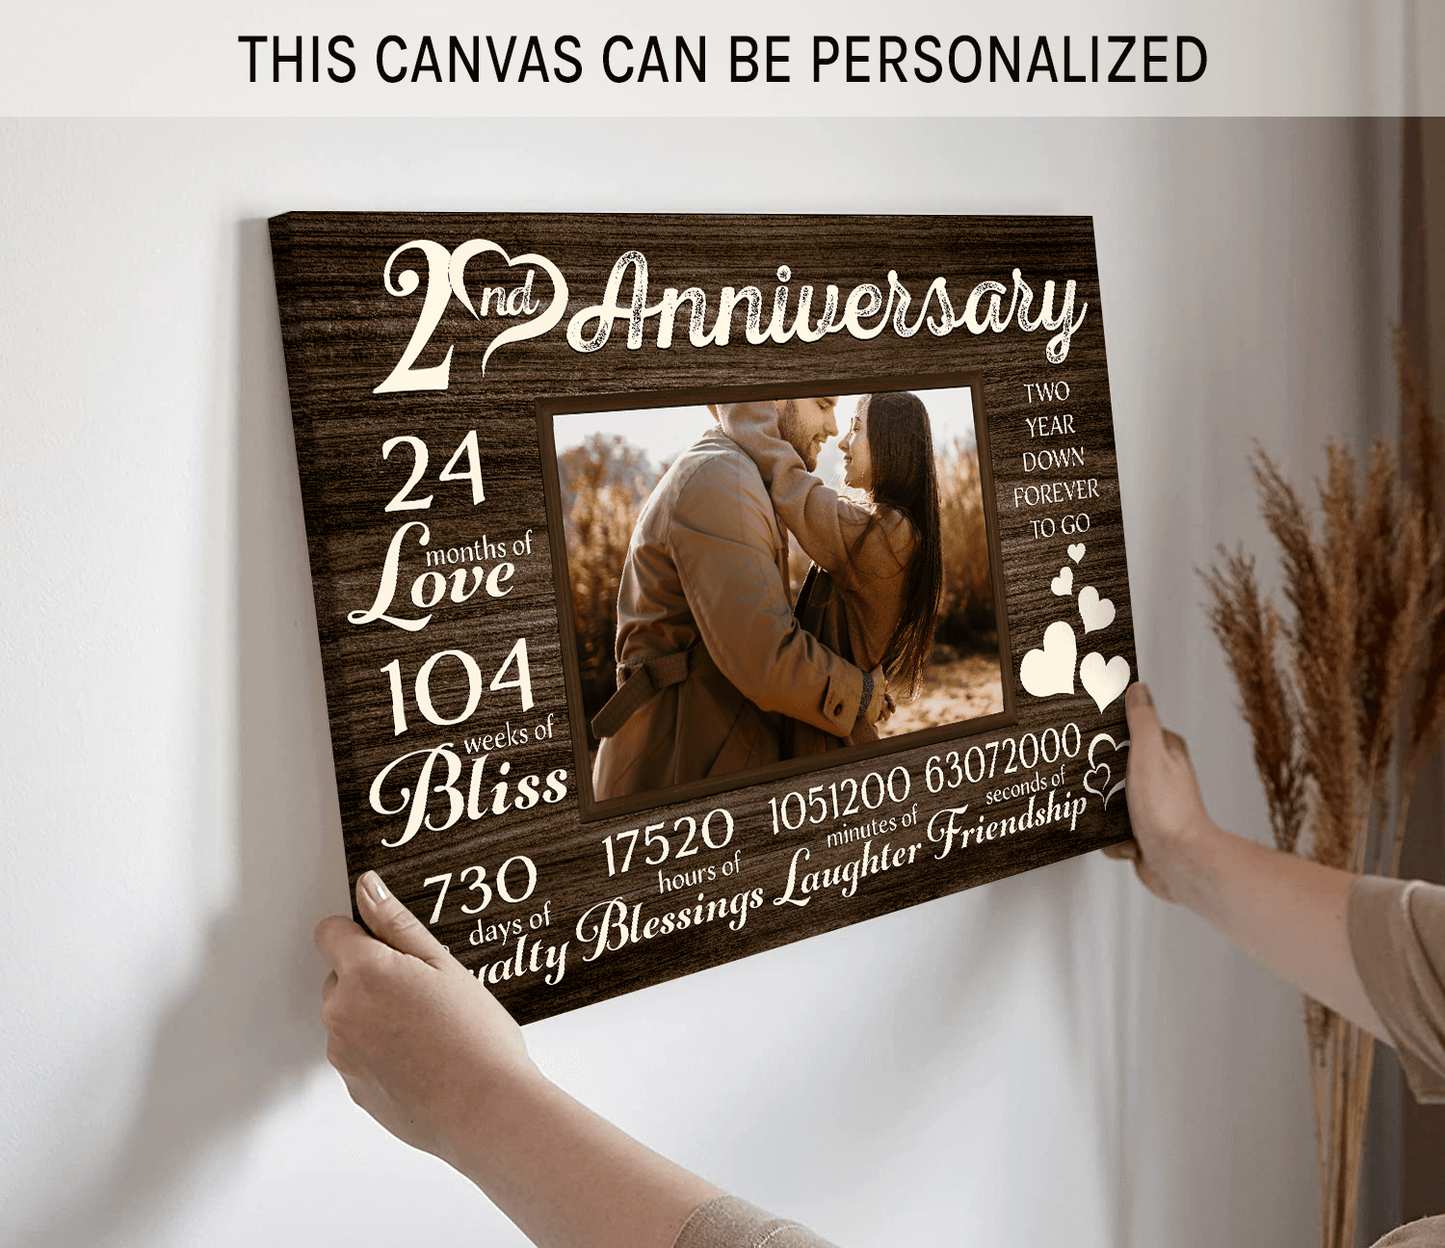 Personalized 2 year anniversary gift for him for her - 24 months of love - custom Couple Canvas print - MyMindfulGifts